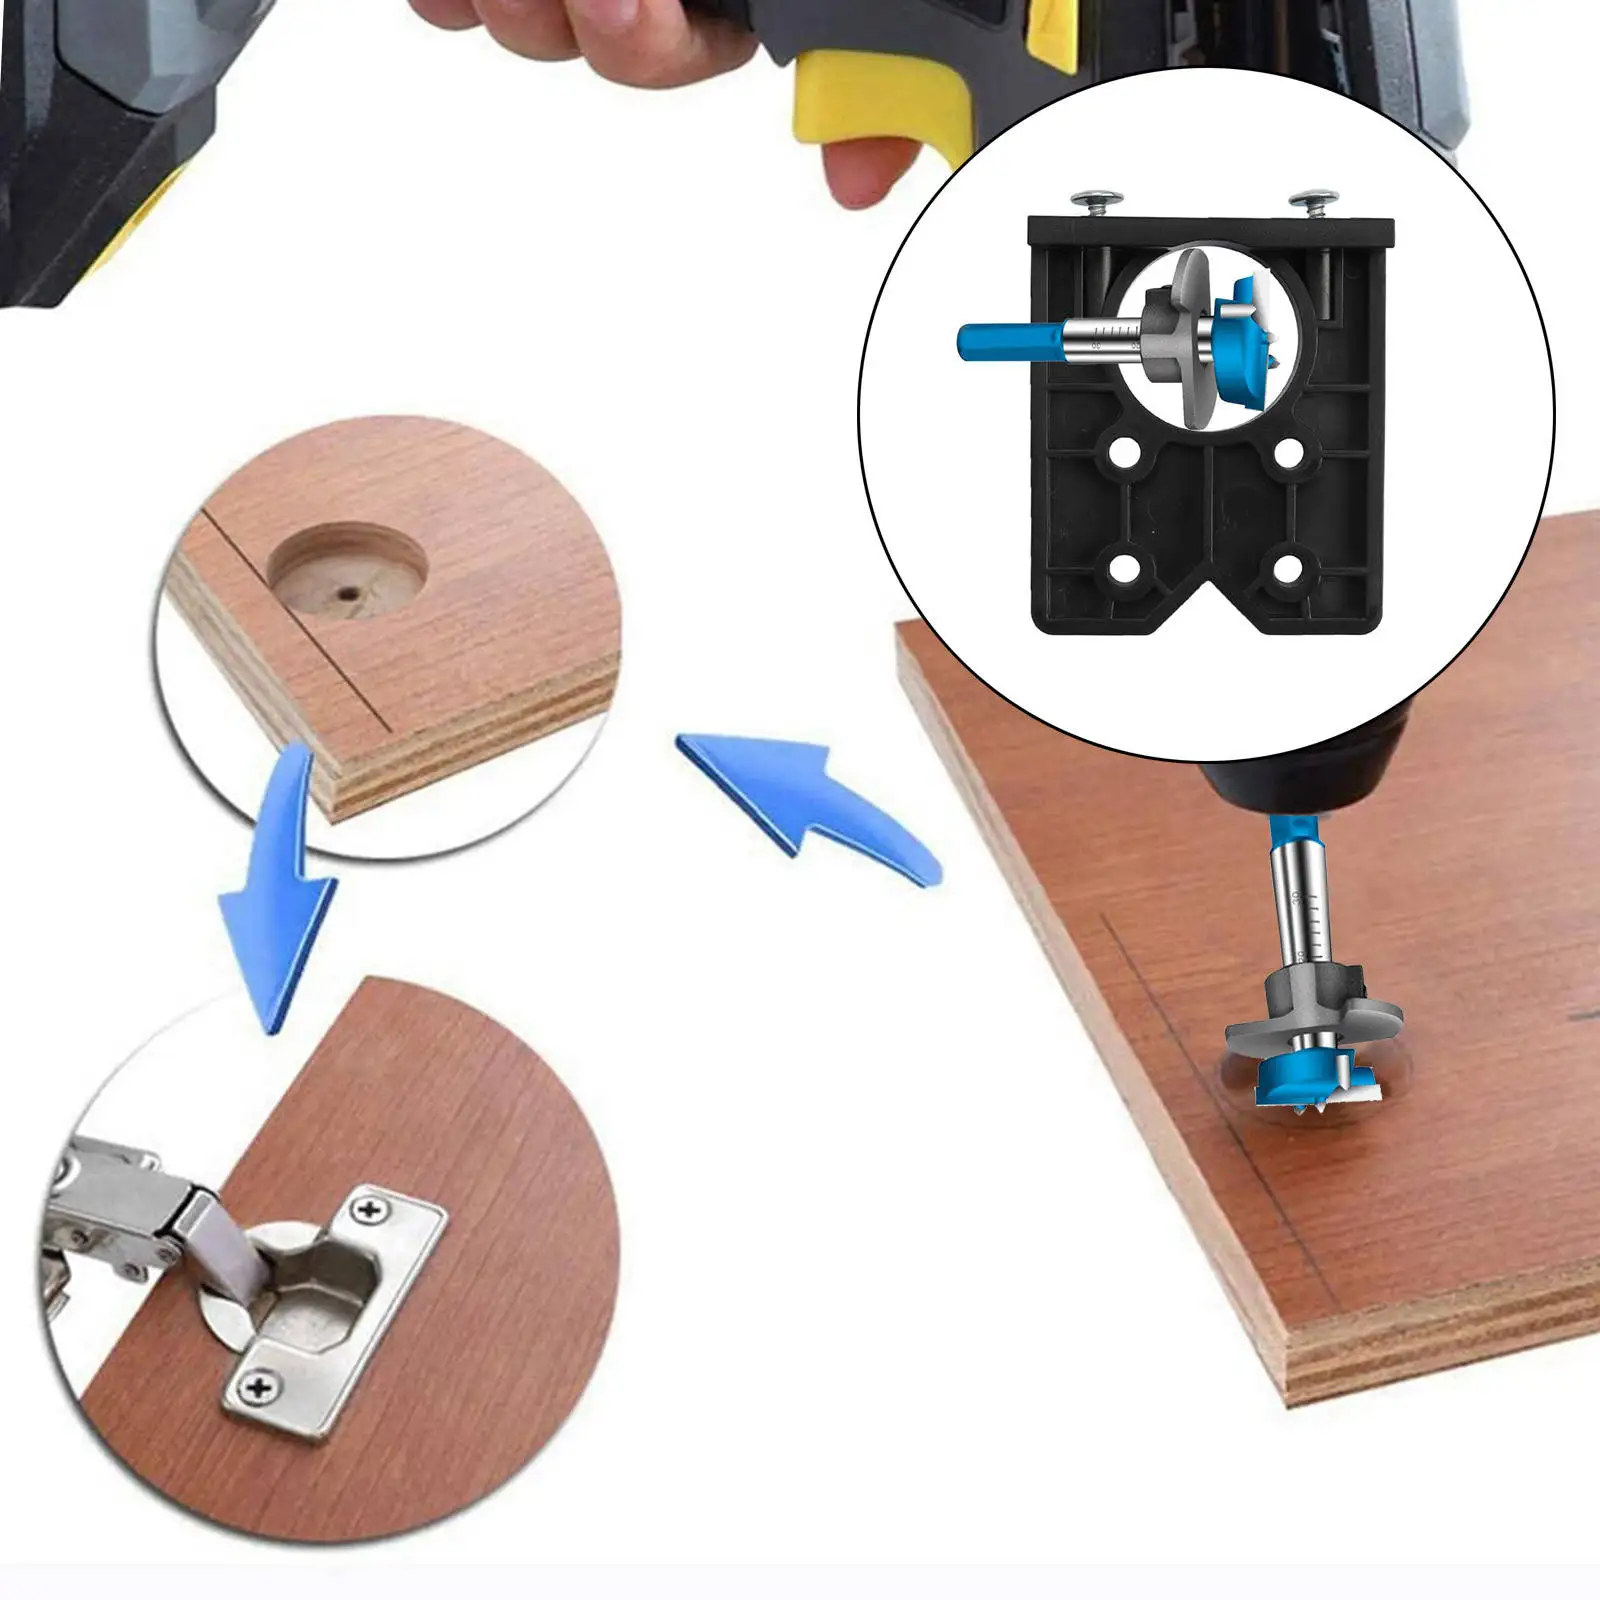 35mm Hinge Hole Drilling Guide Locator Hinge Drilling Jig Drill Woodworking Door Hole Opener Cabinet Carpentry Accessories Tool